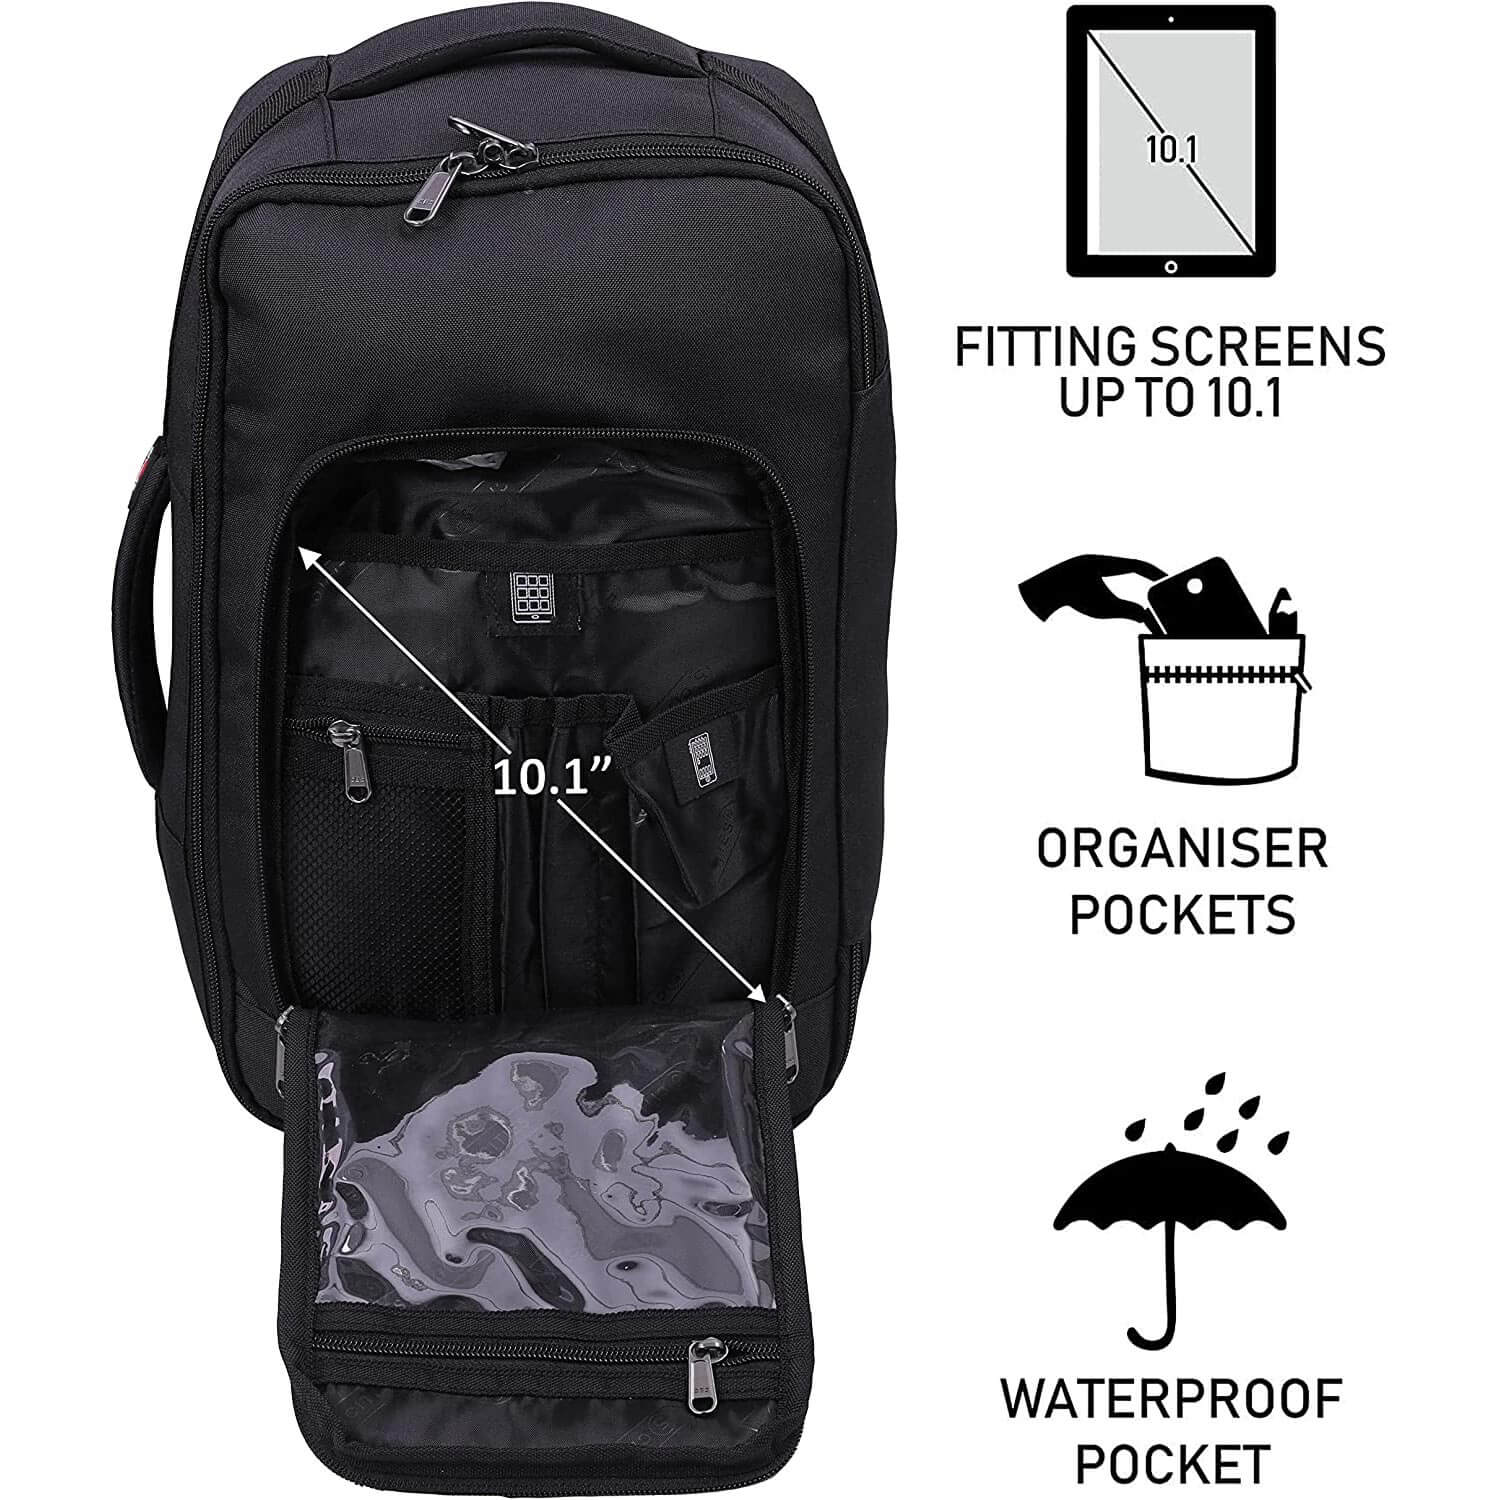 Cabin Max Hand Luggage - Cabin suitcases, backpacks, and travel bags